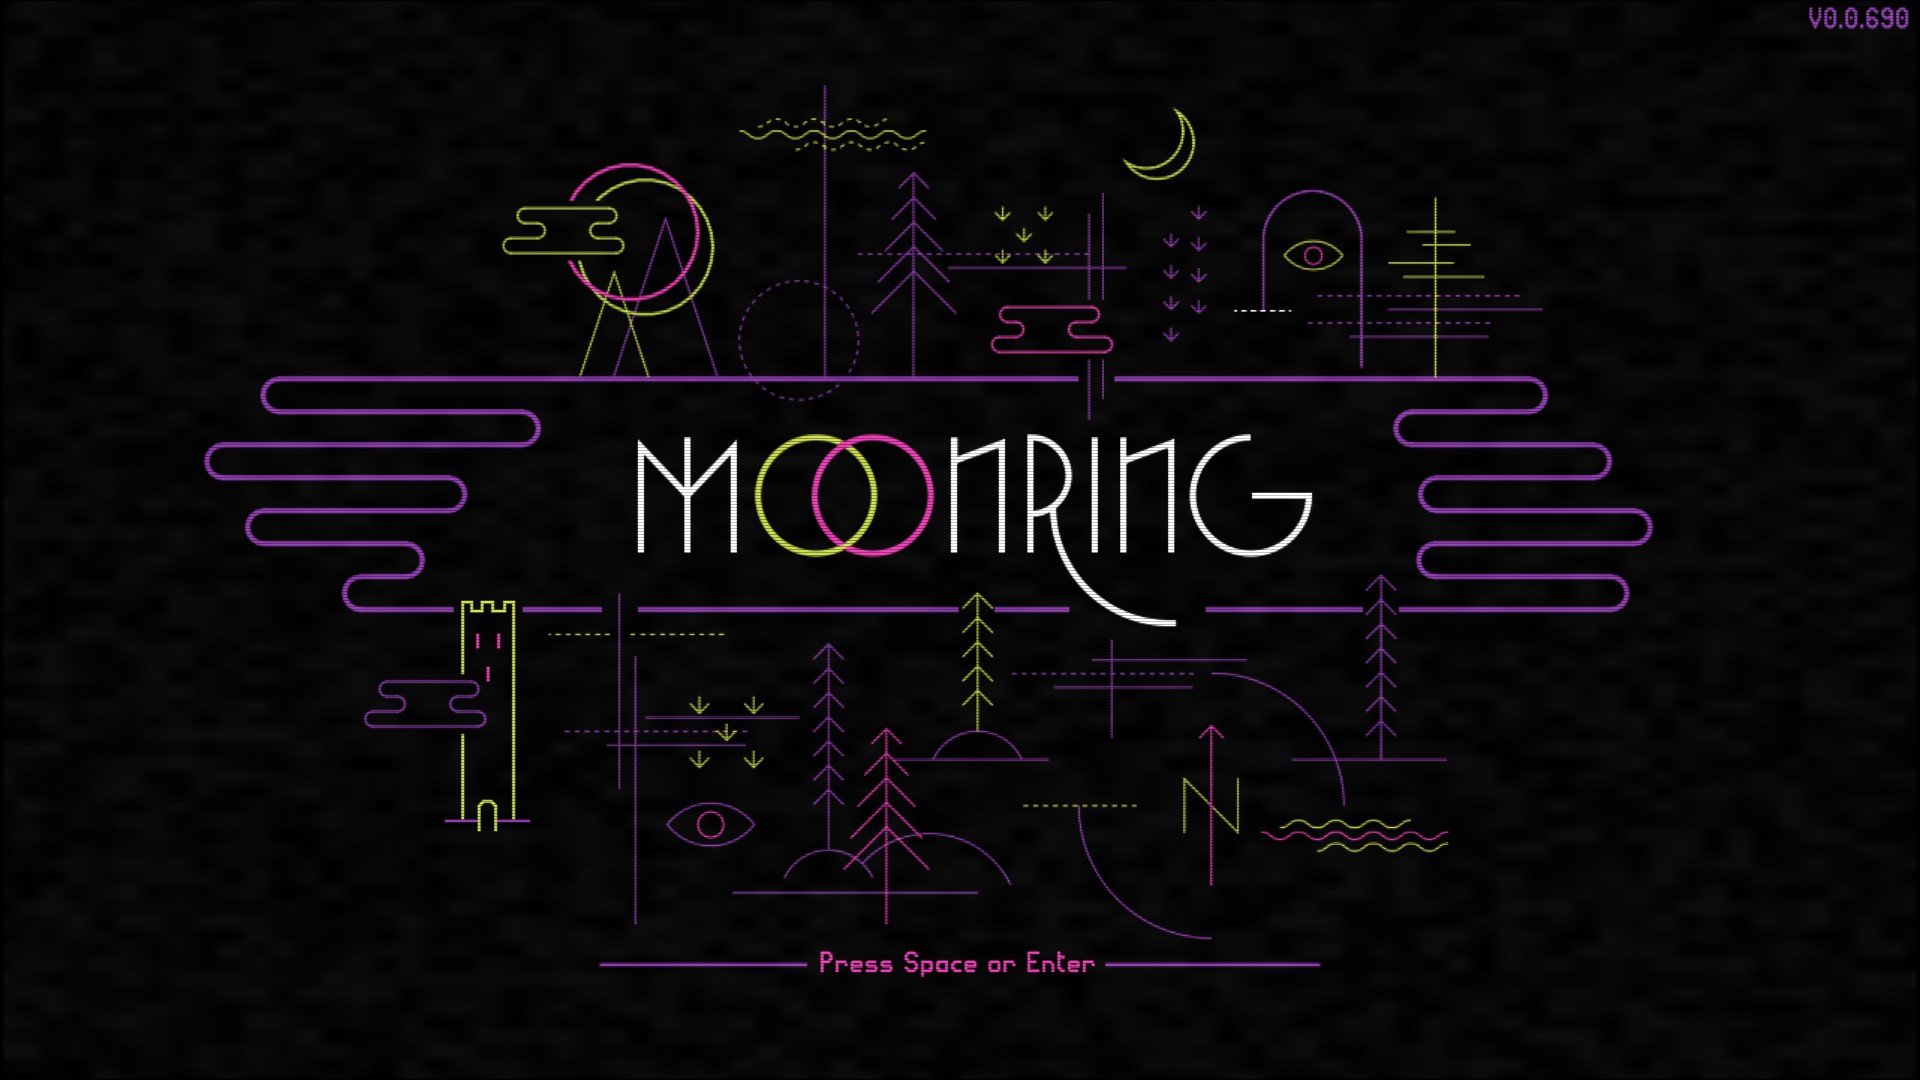 A screenshot showing the title menu of Moonring, a video game.